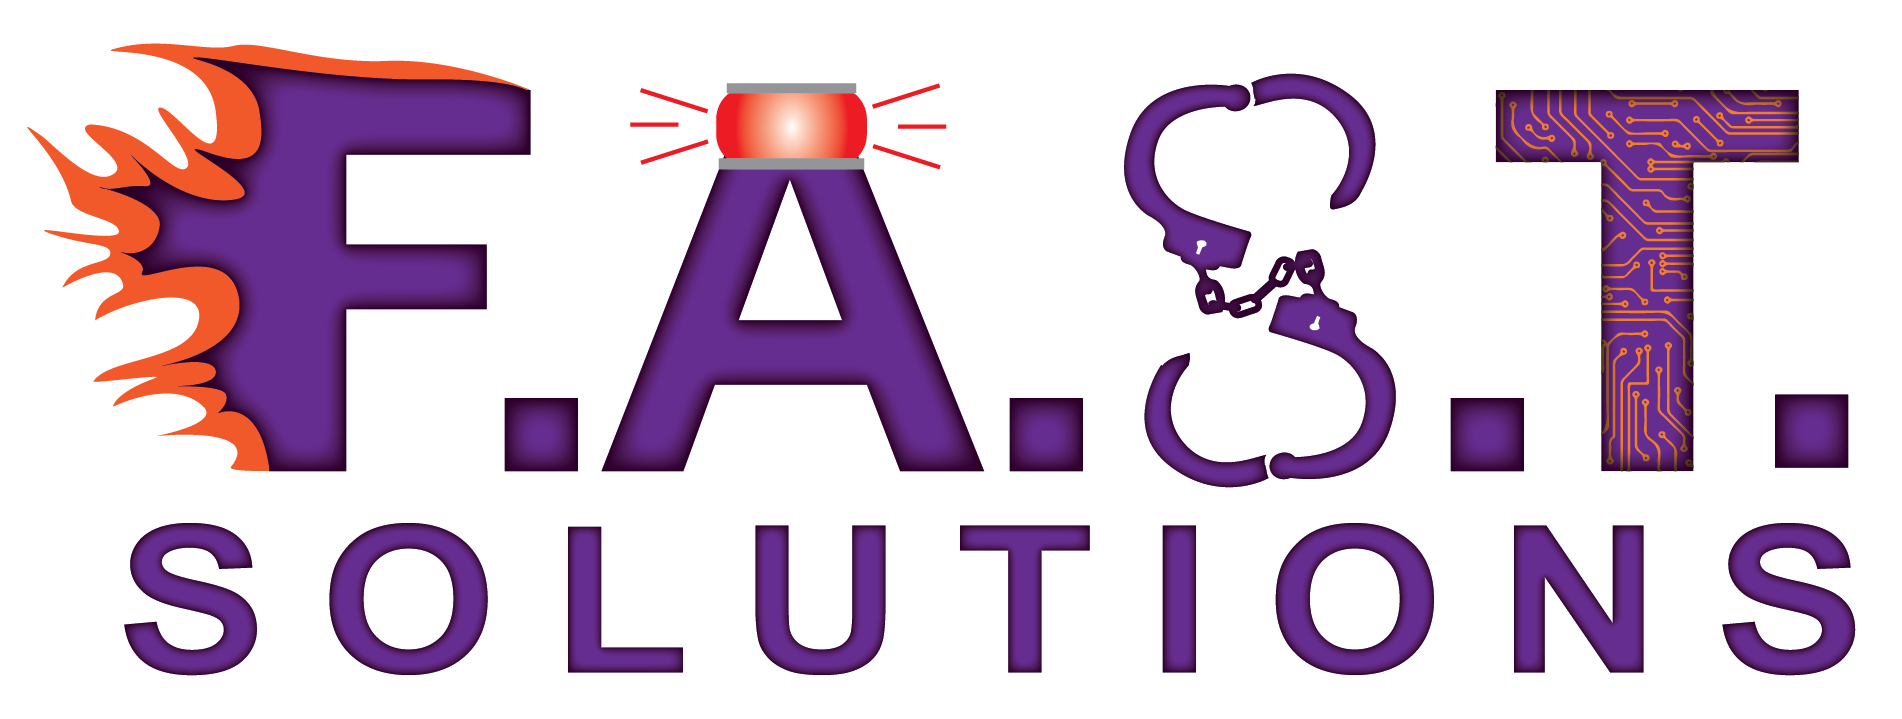 F.A.S.T. Solutions Logo